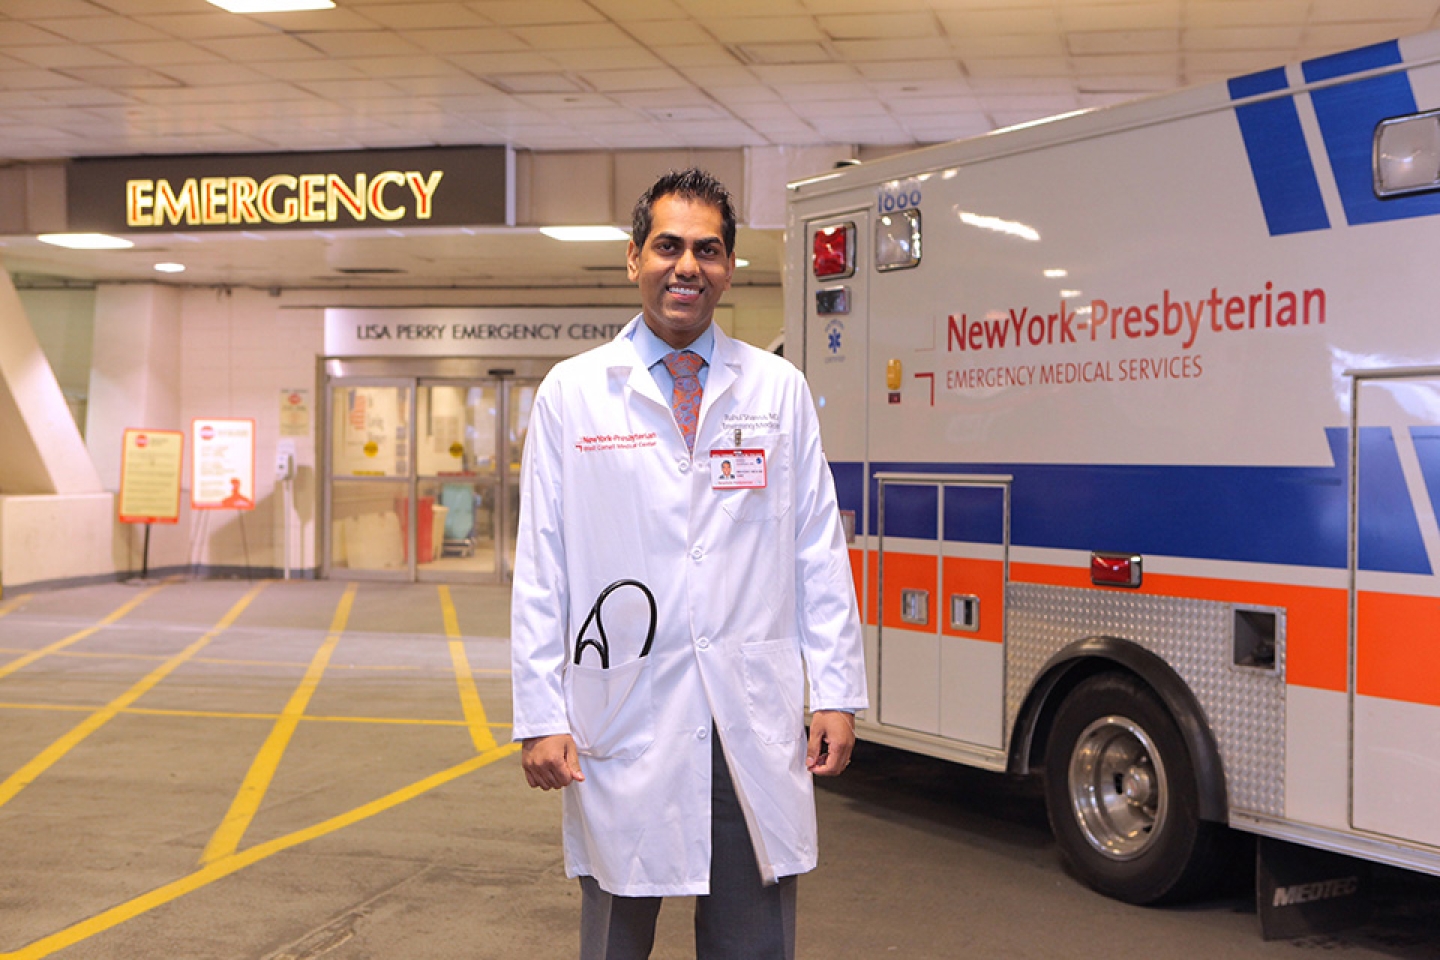 Dr. Rahul Sharma from the Department of Emergency Medicine at Weill Cornell Medicine.